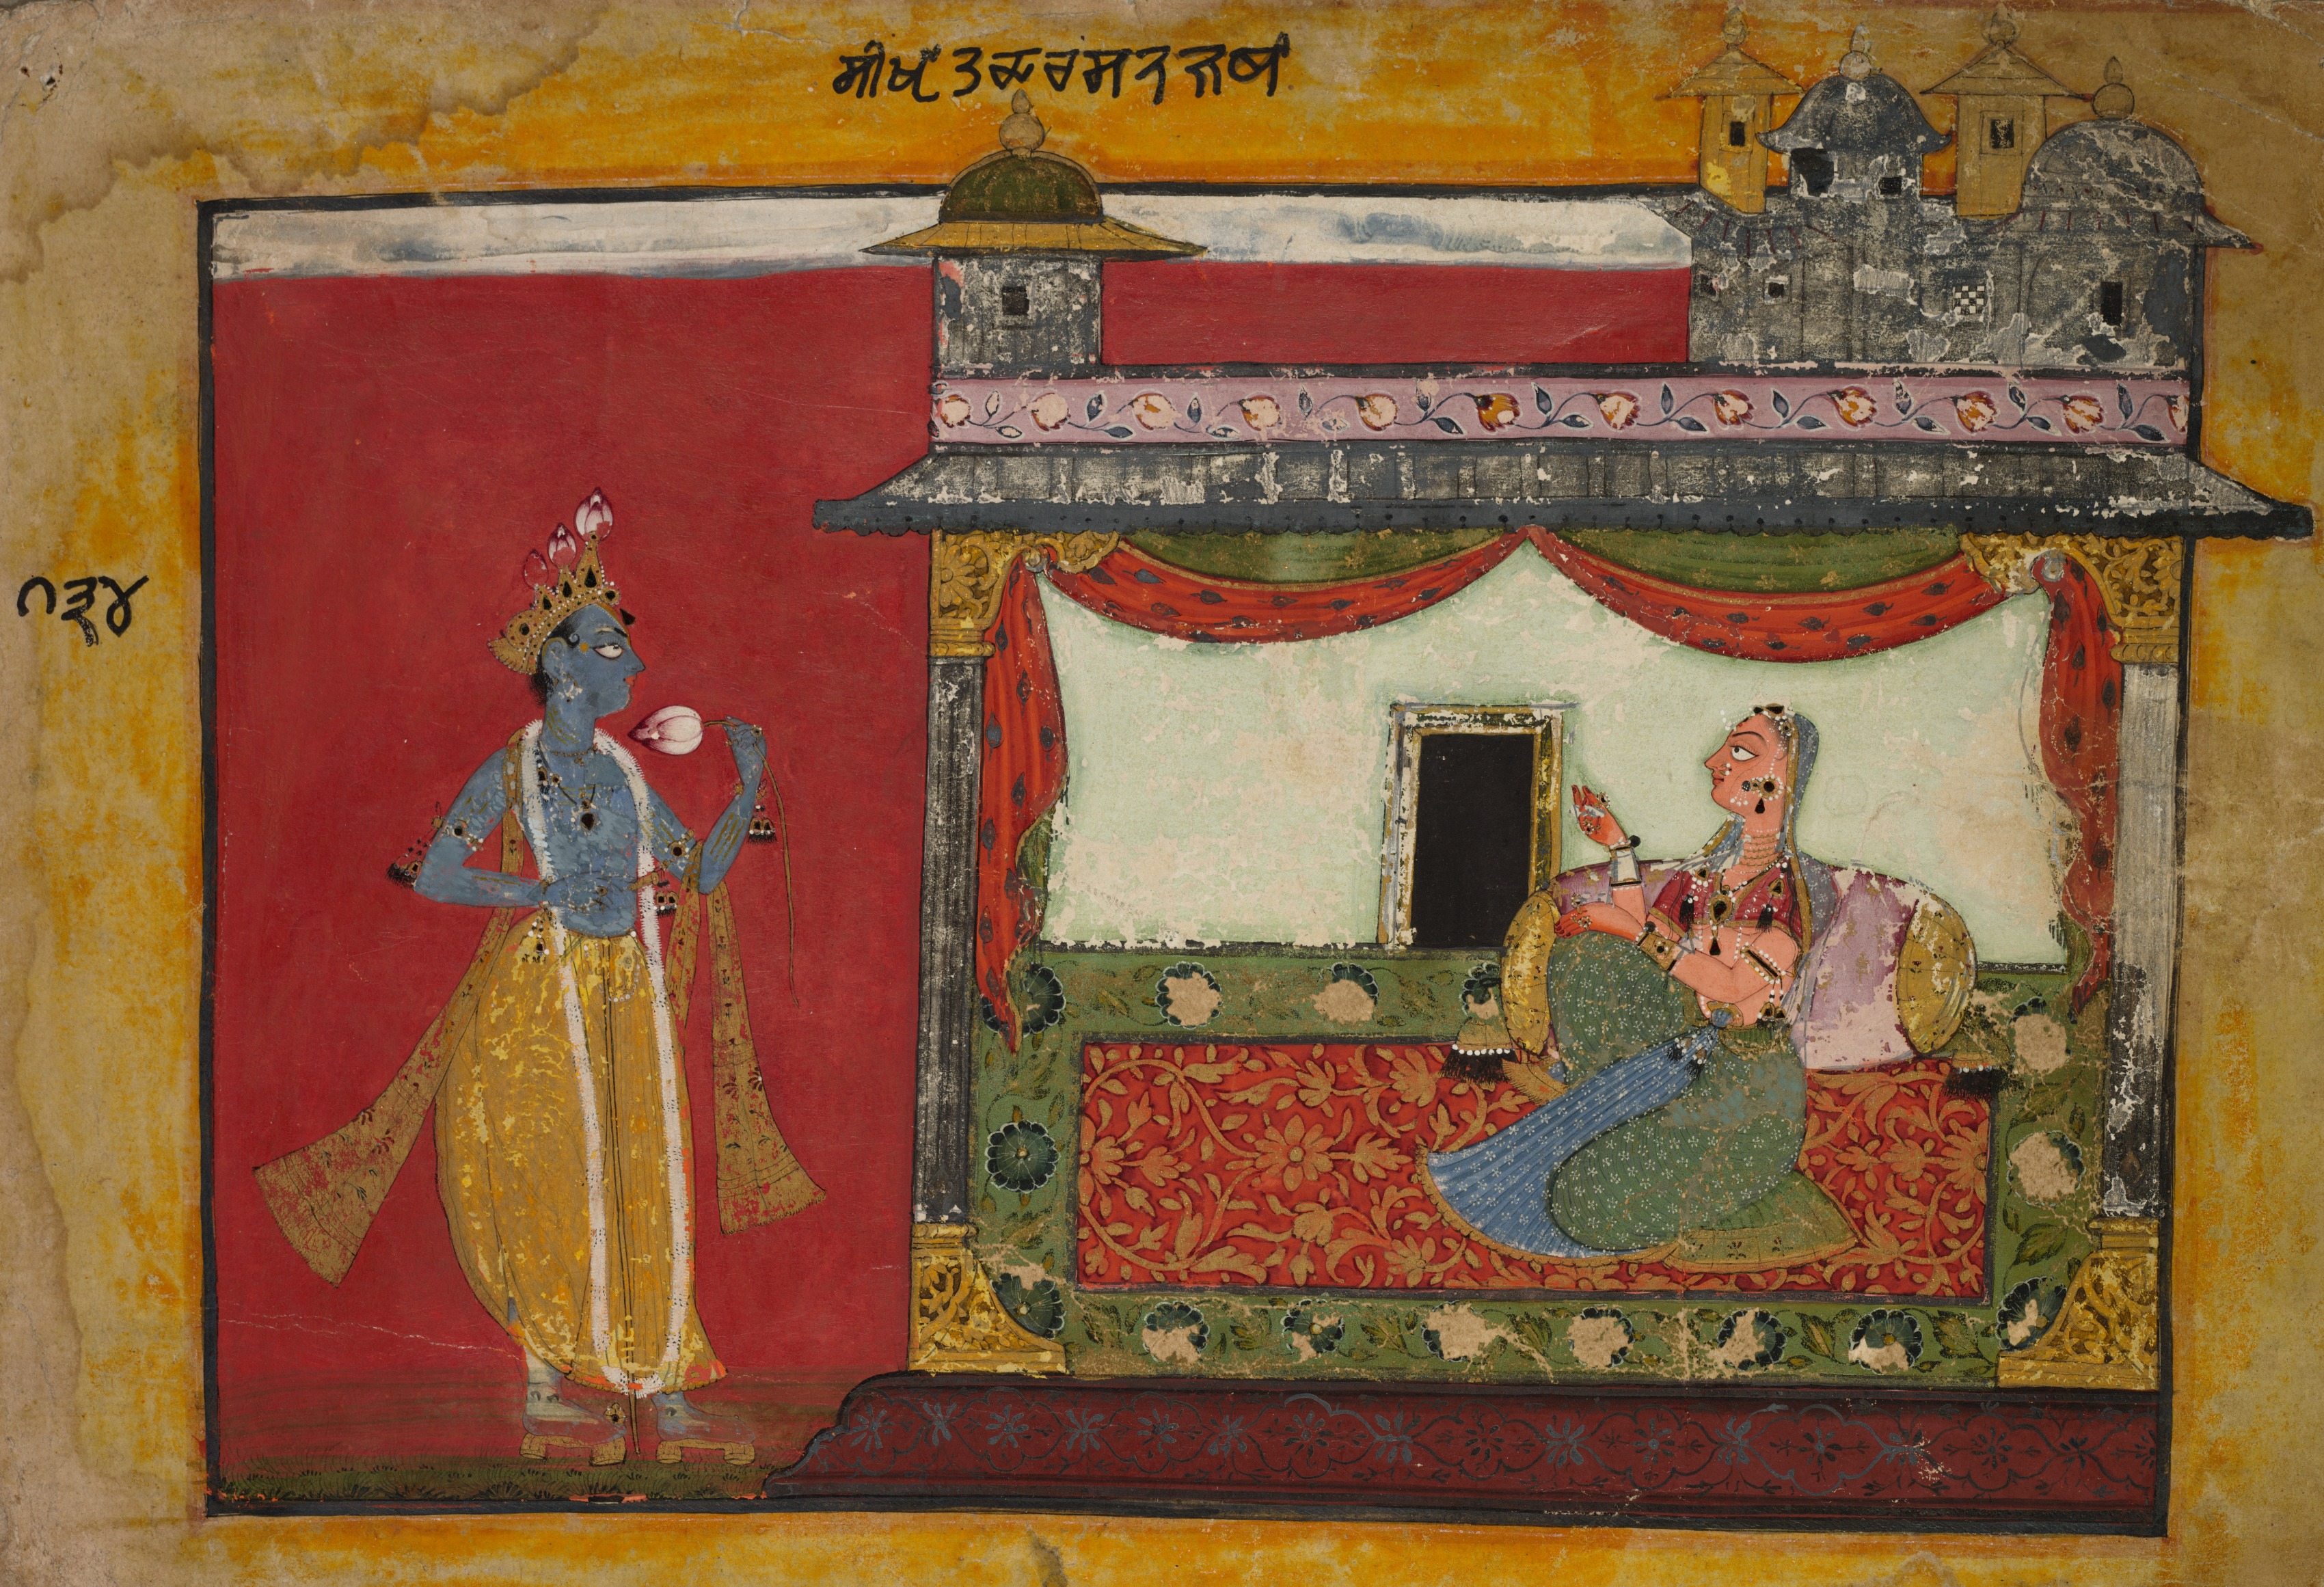 The Approach of Krishna.  Page from a Rasamanjari